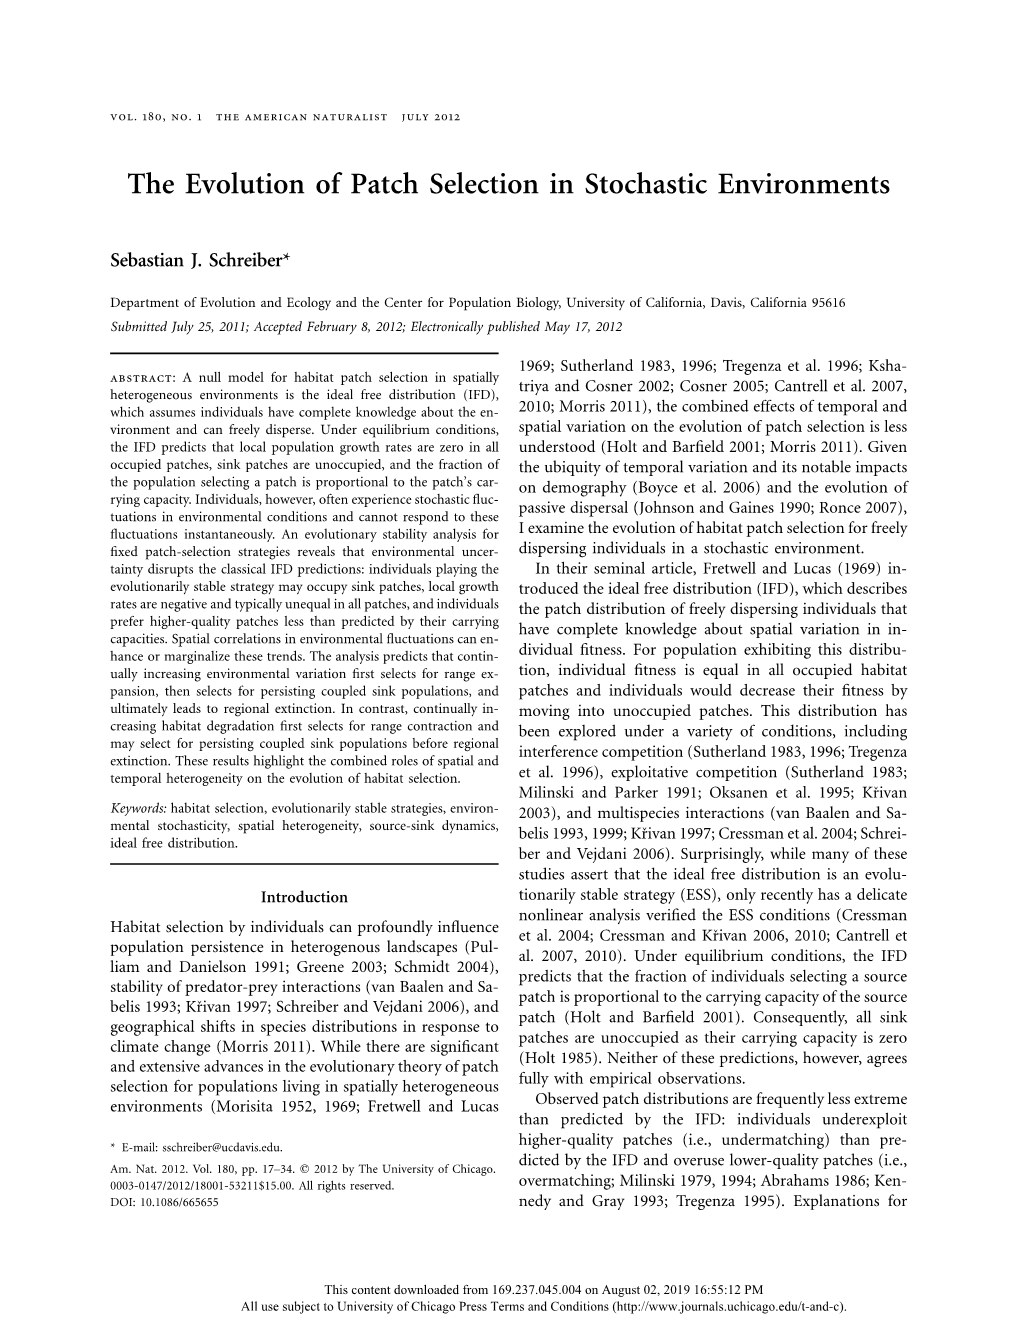 The Evolution of Patch Selection in Stochastic Environments